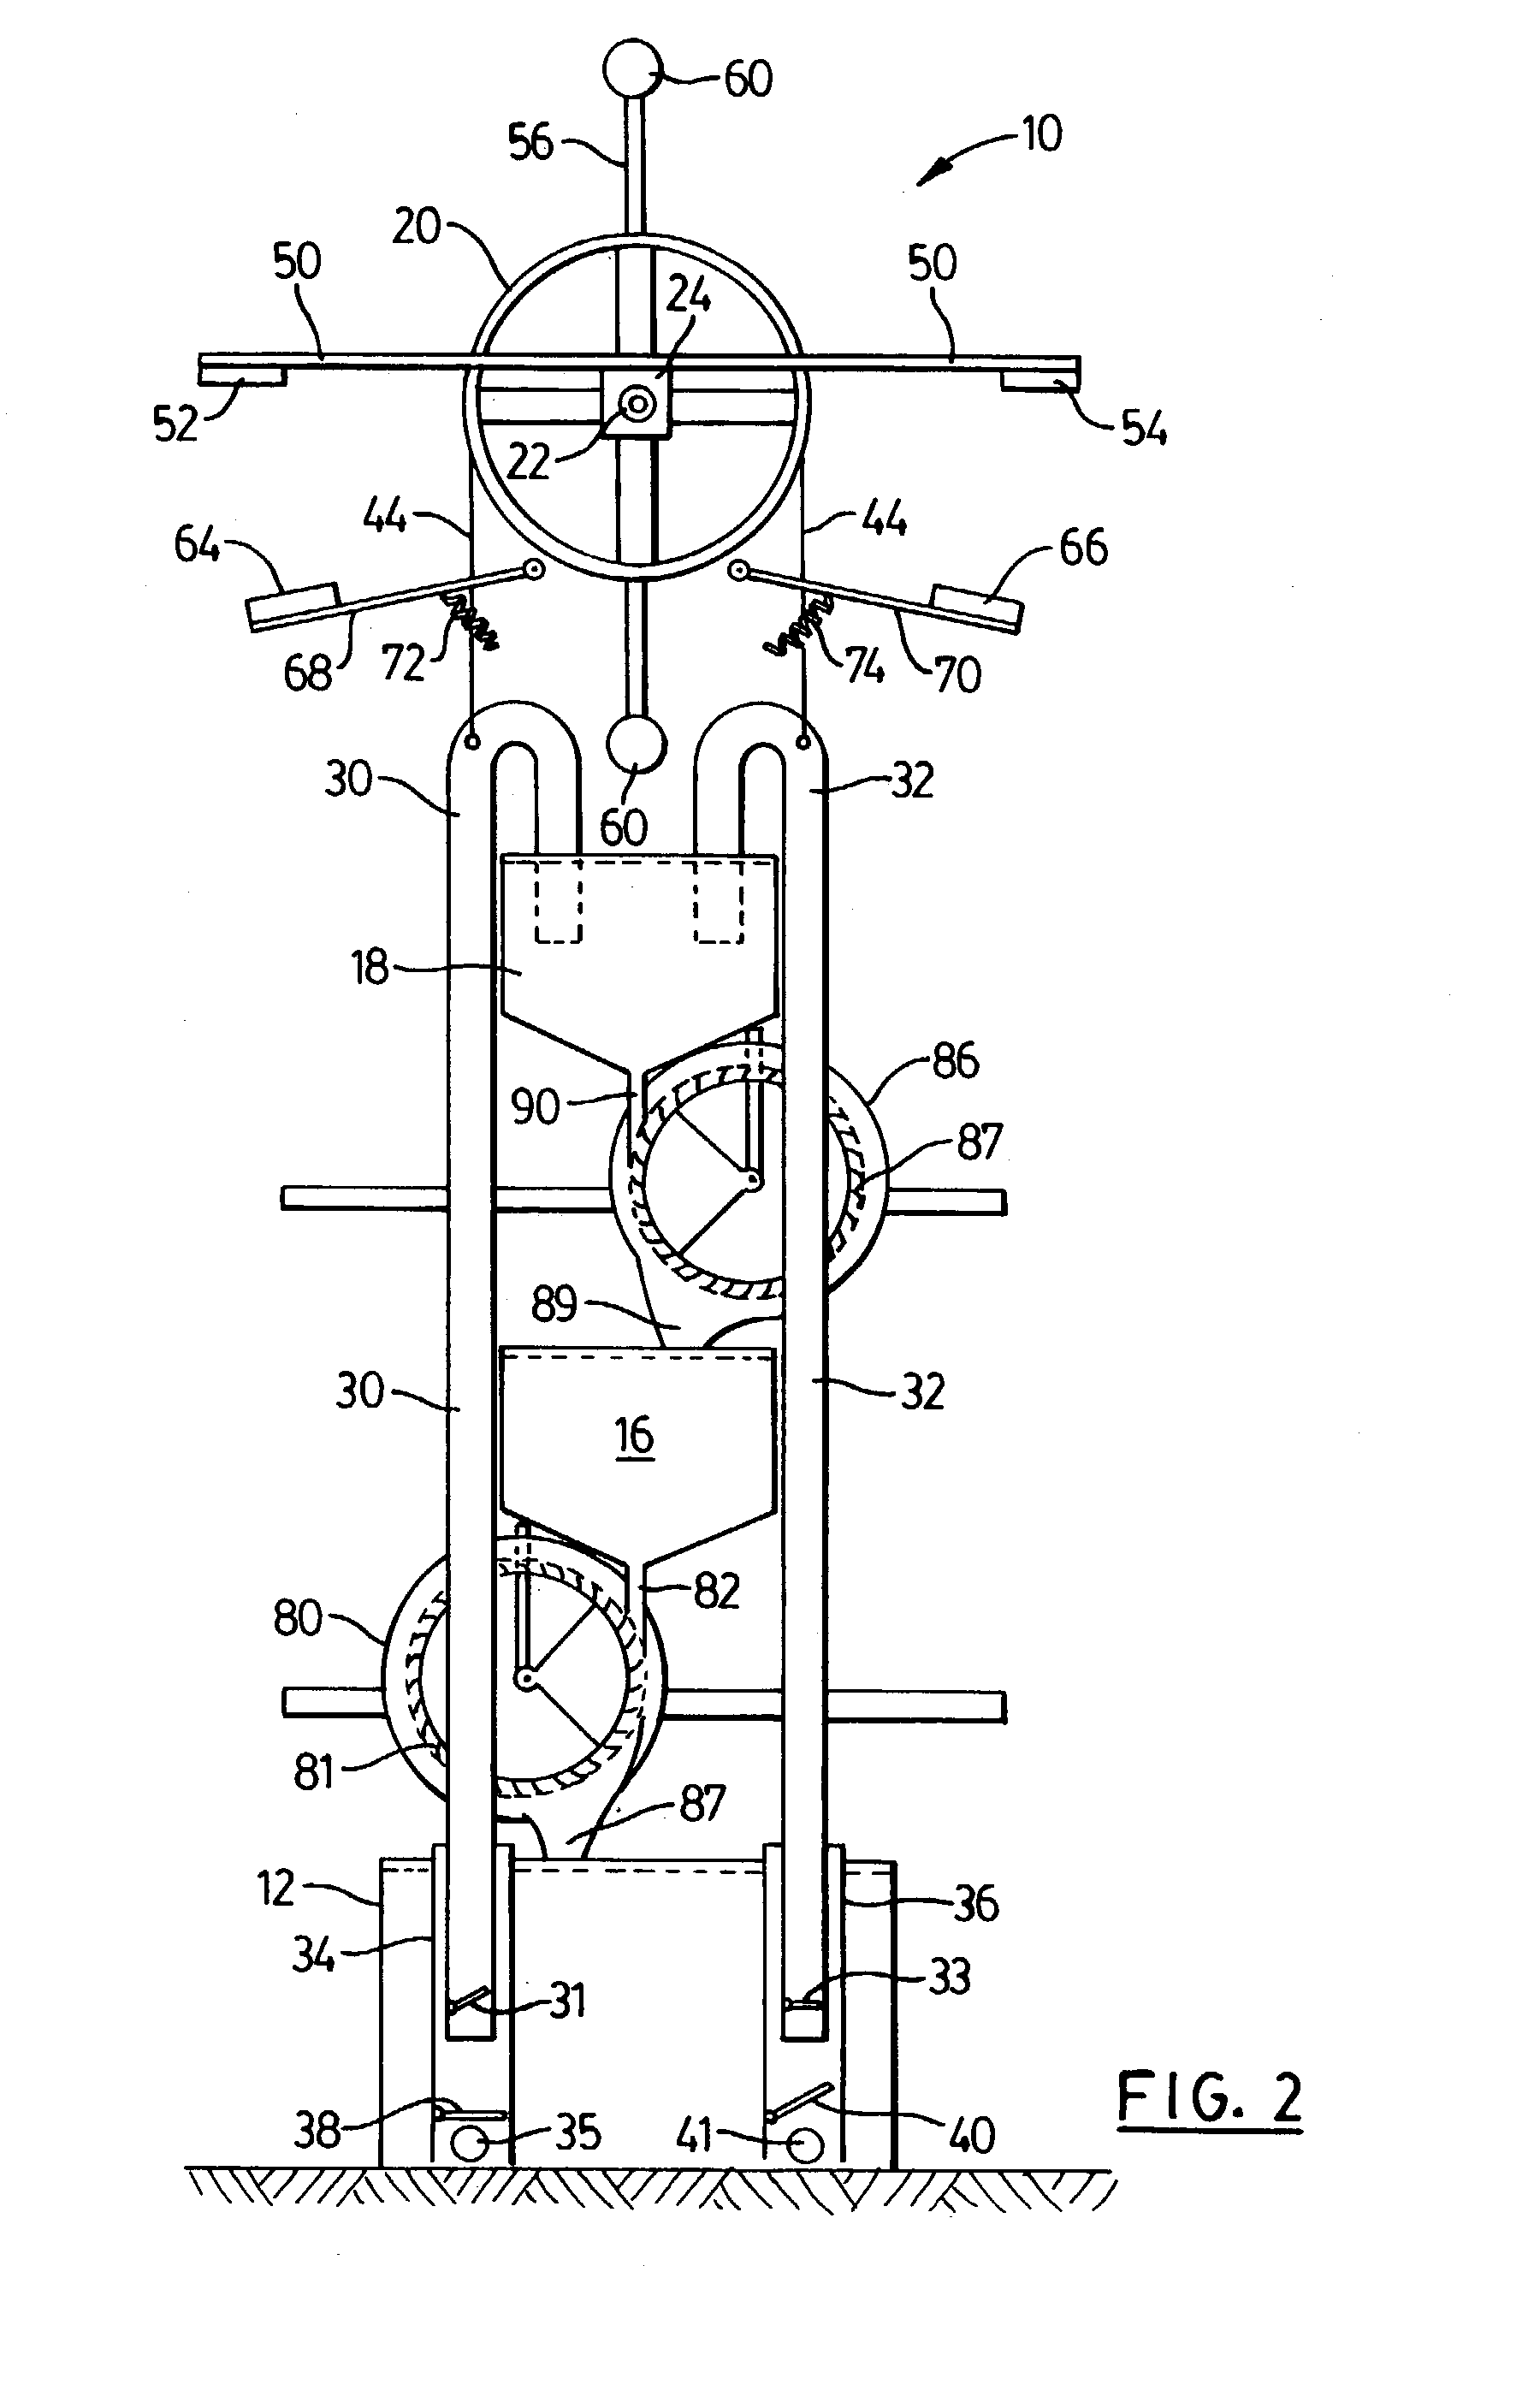 Apparatus for converting gravitational energy to electrical energy